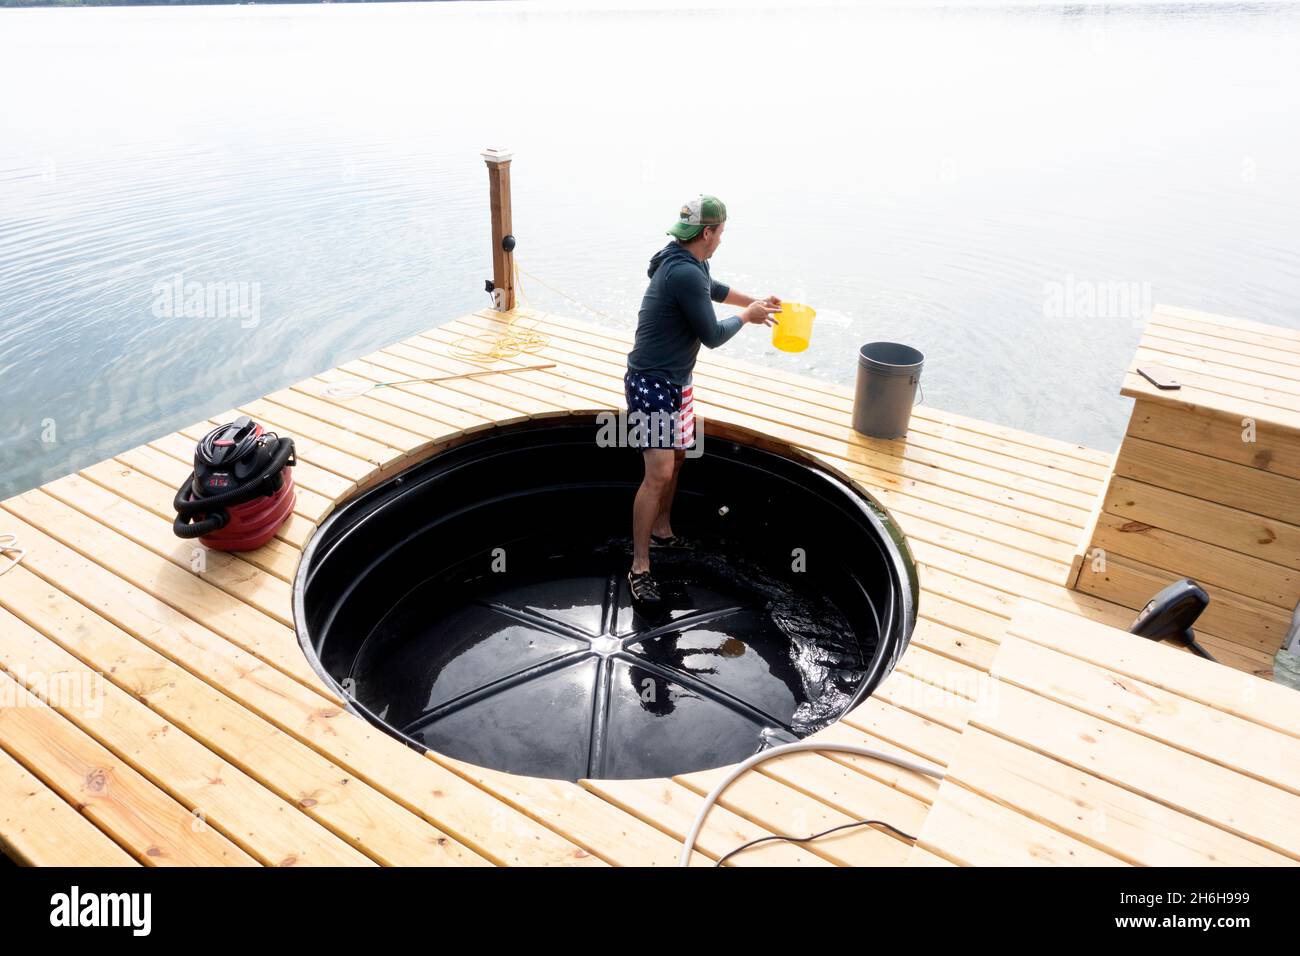 young man bailing out the  hot tub on a boat which he built wearing patriotic shorts. Clitherall Minnesota MN USA Stock Photo